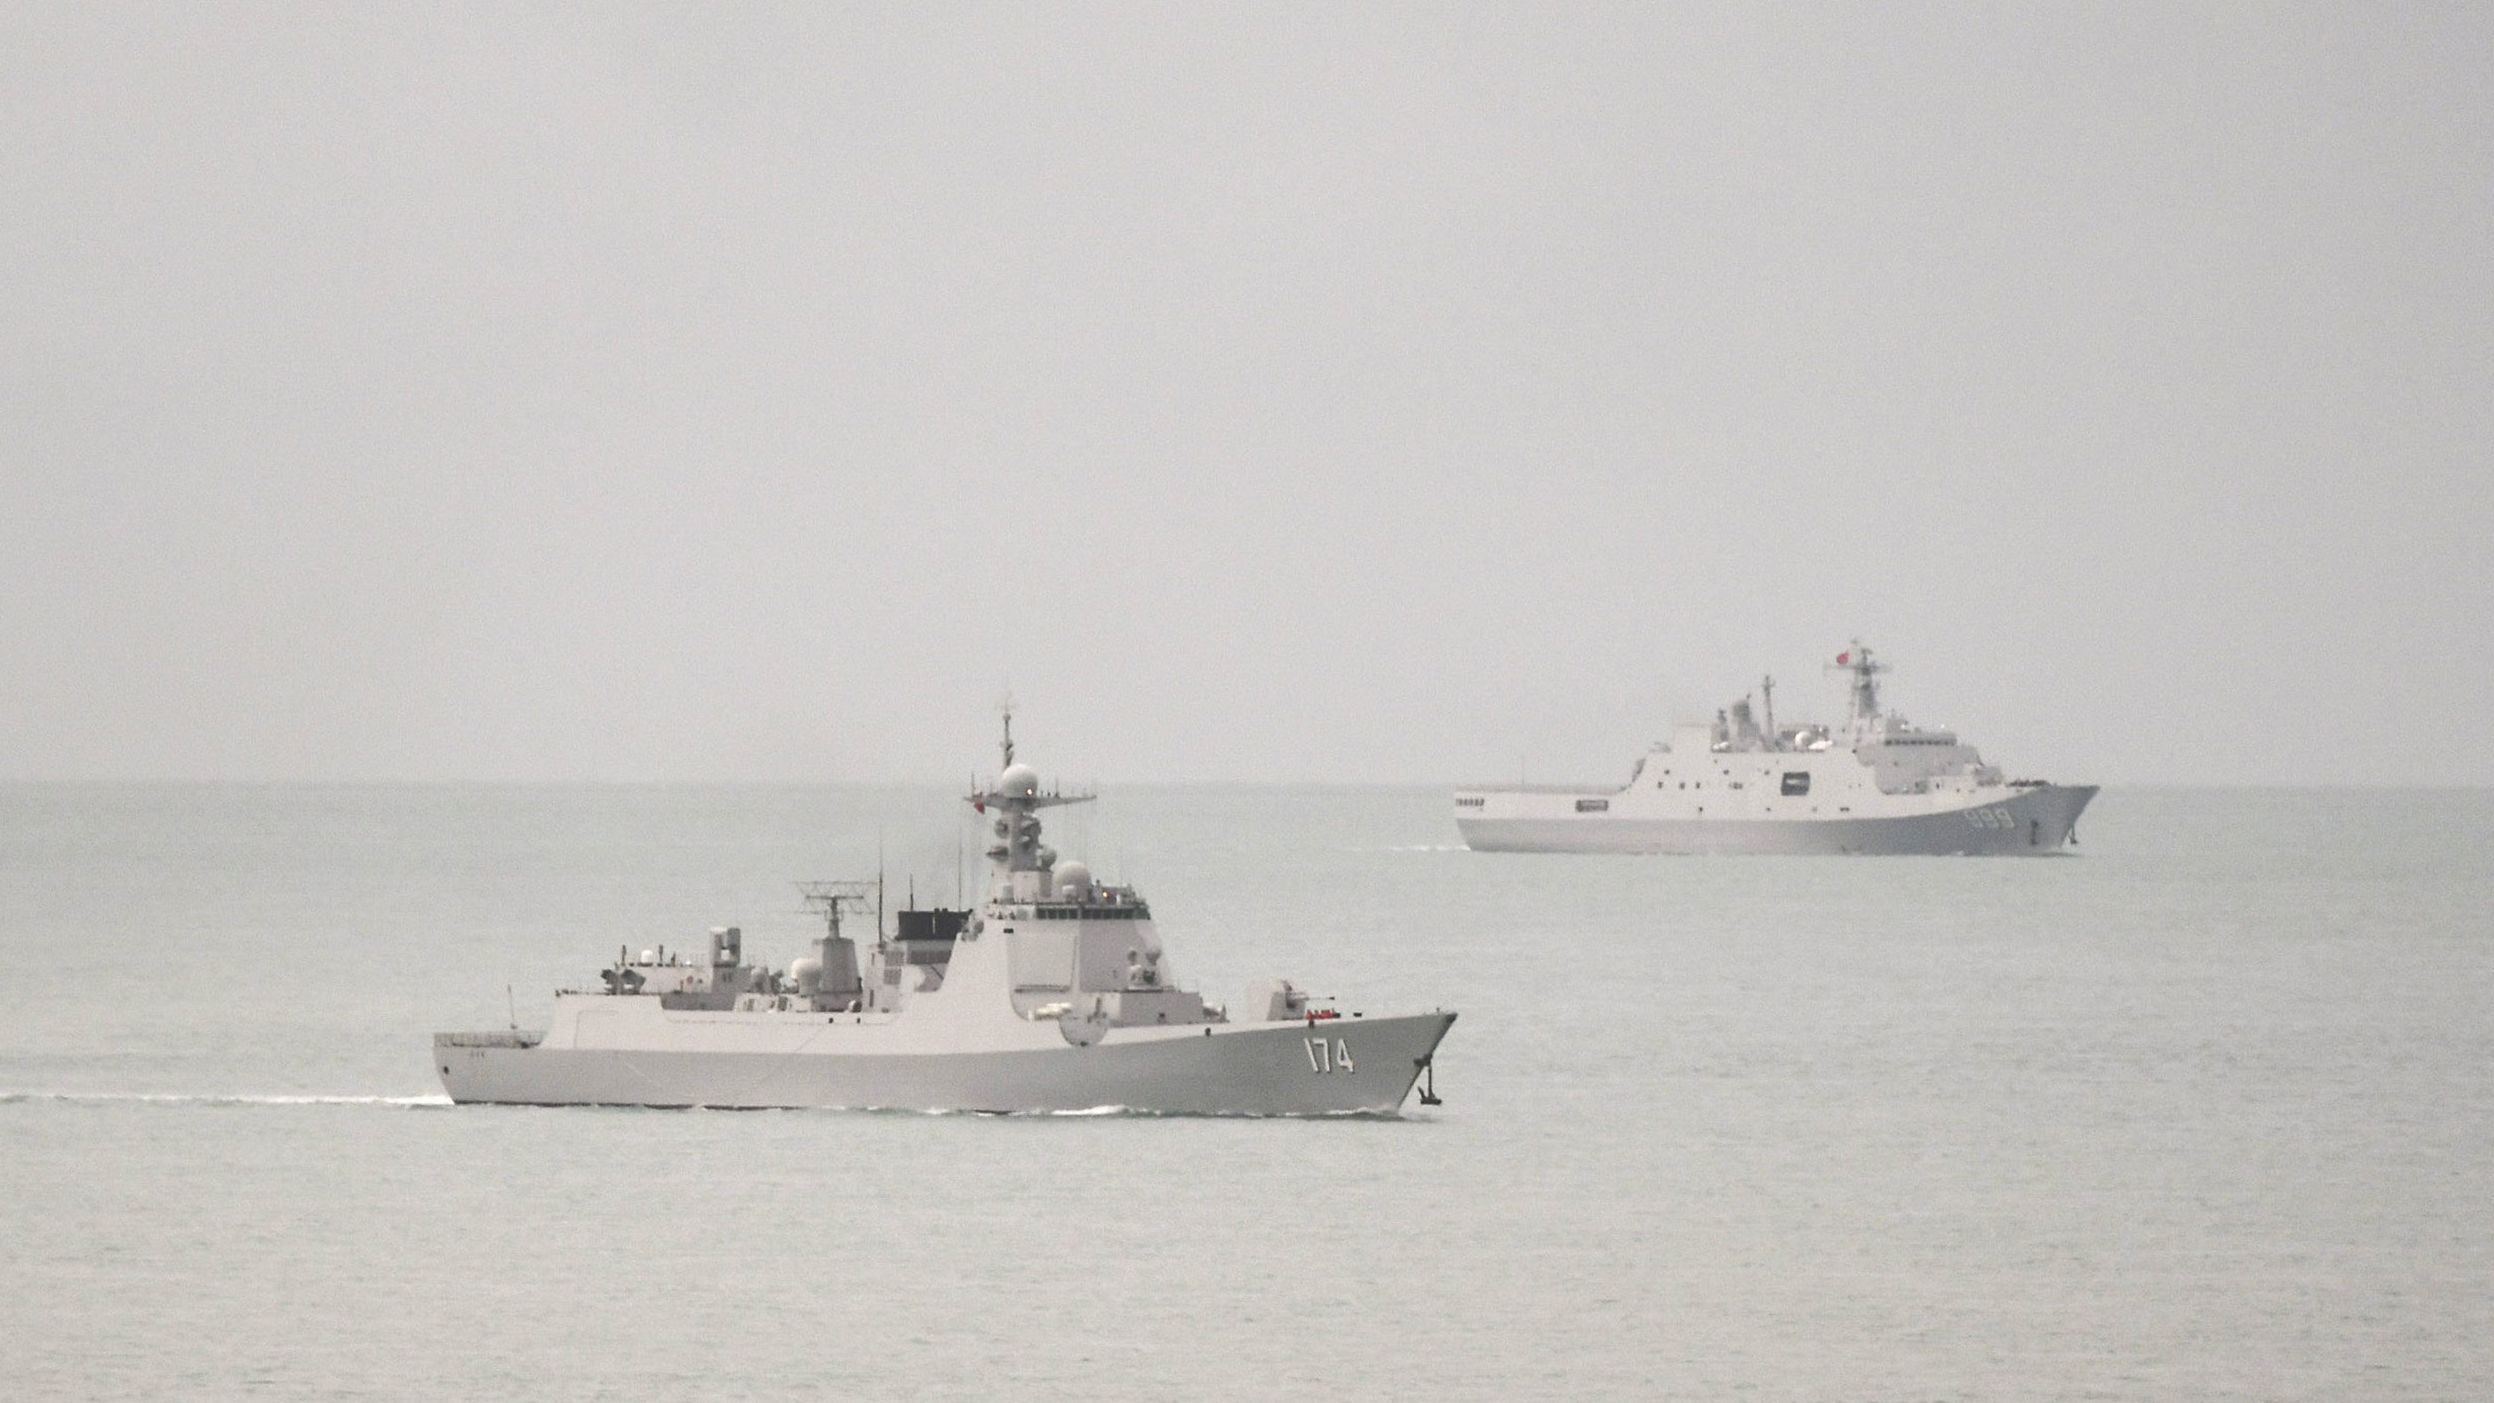 Two Chinese People's Liberation Army warships are seen in an image released by the Australian military after it said one of the ships endangered an Australian plane with a laser.